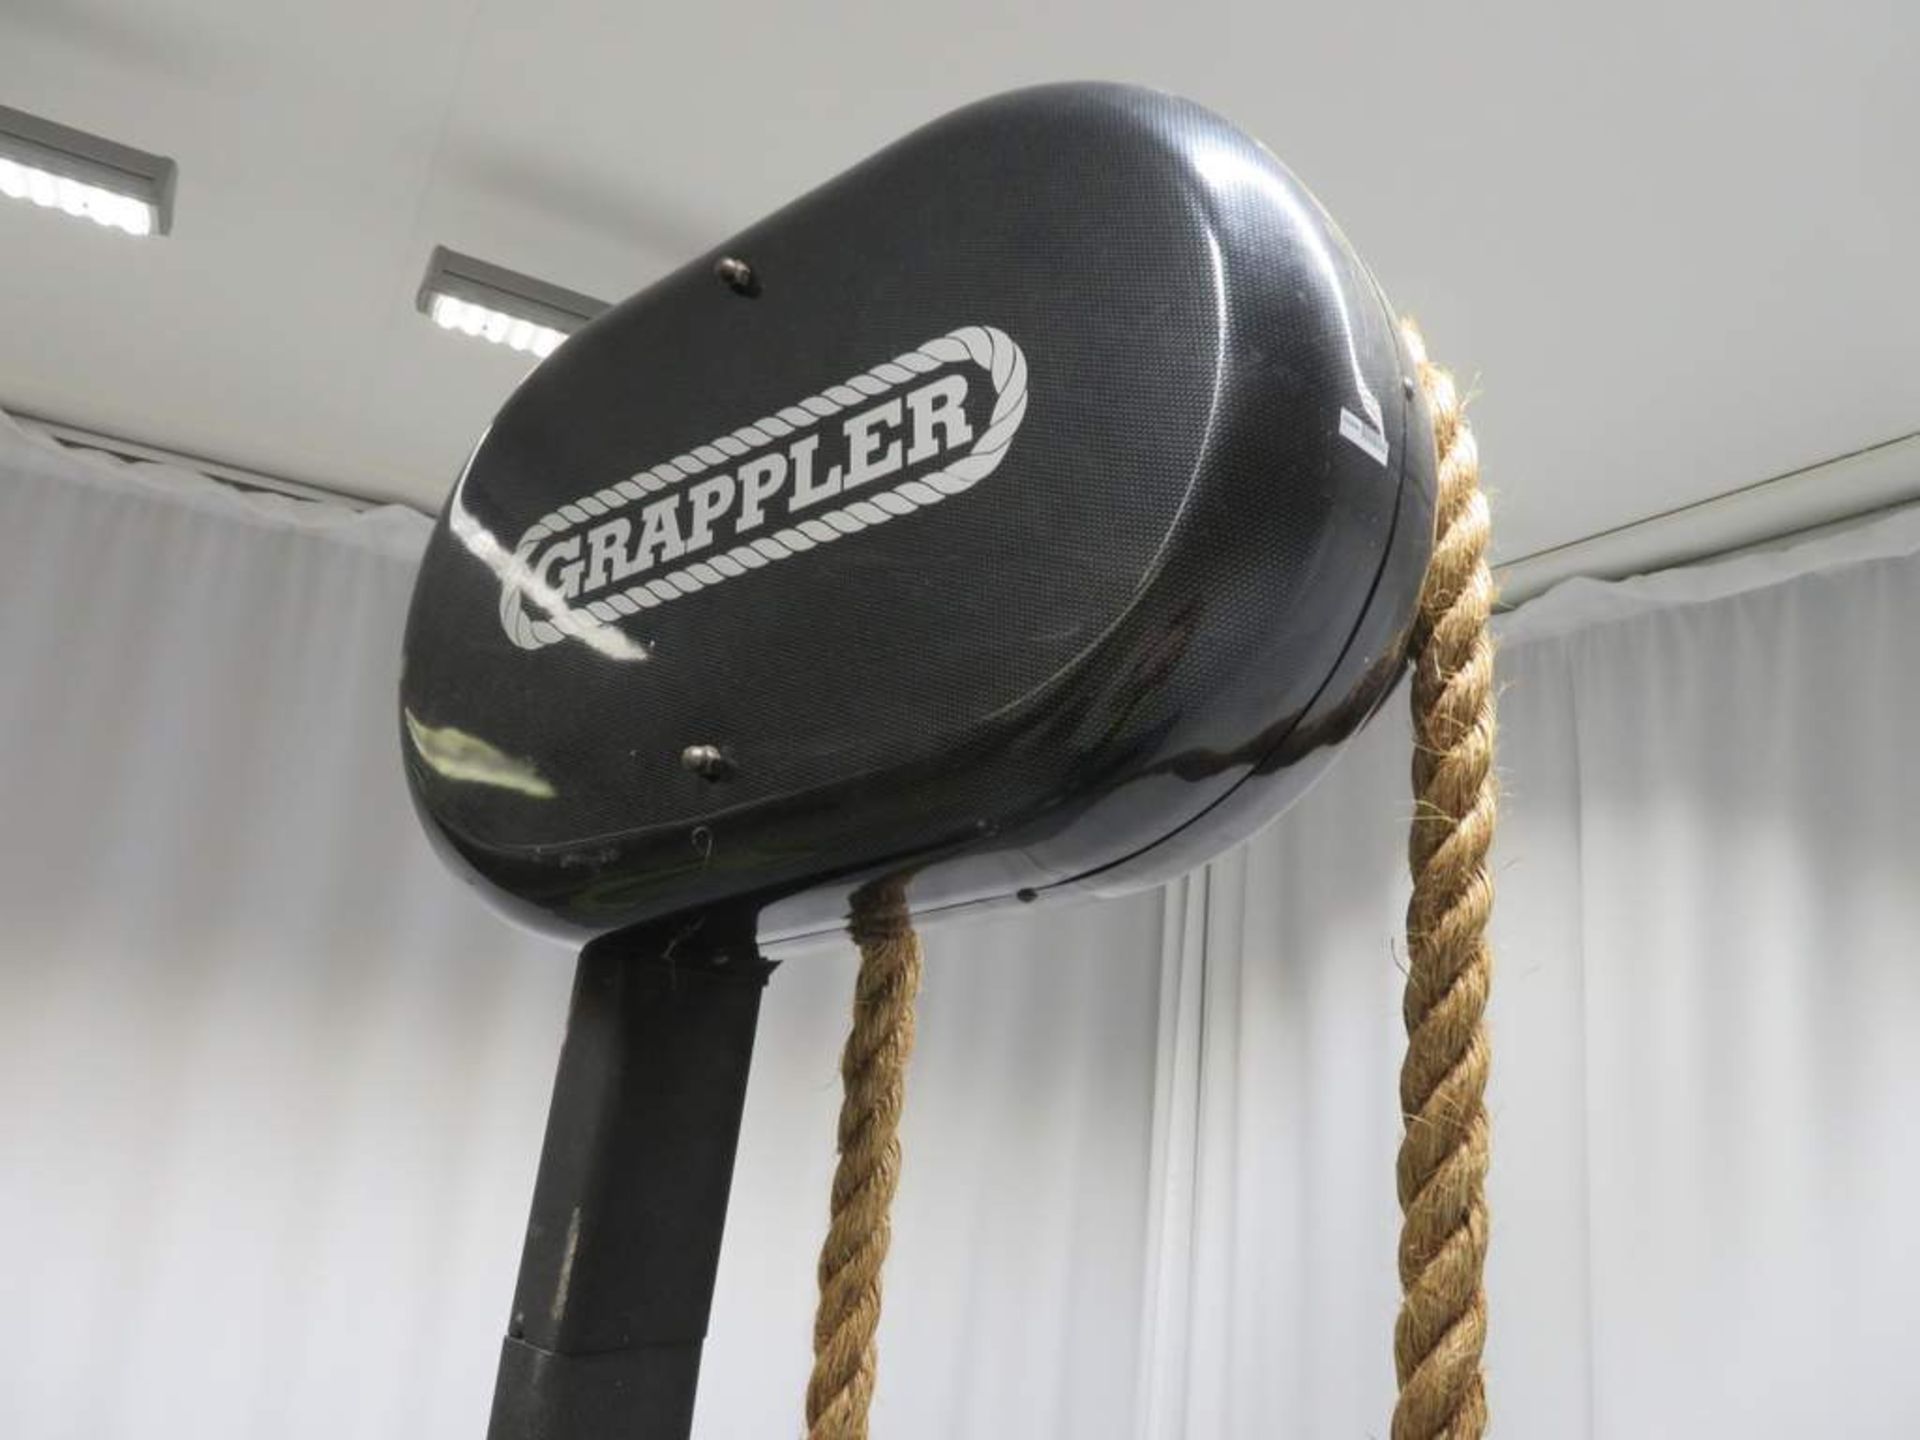 Grappler - Rope Pull Exercise Station, Self Powered Display Console. - Image 5 of 9